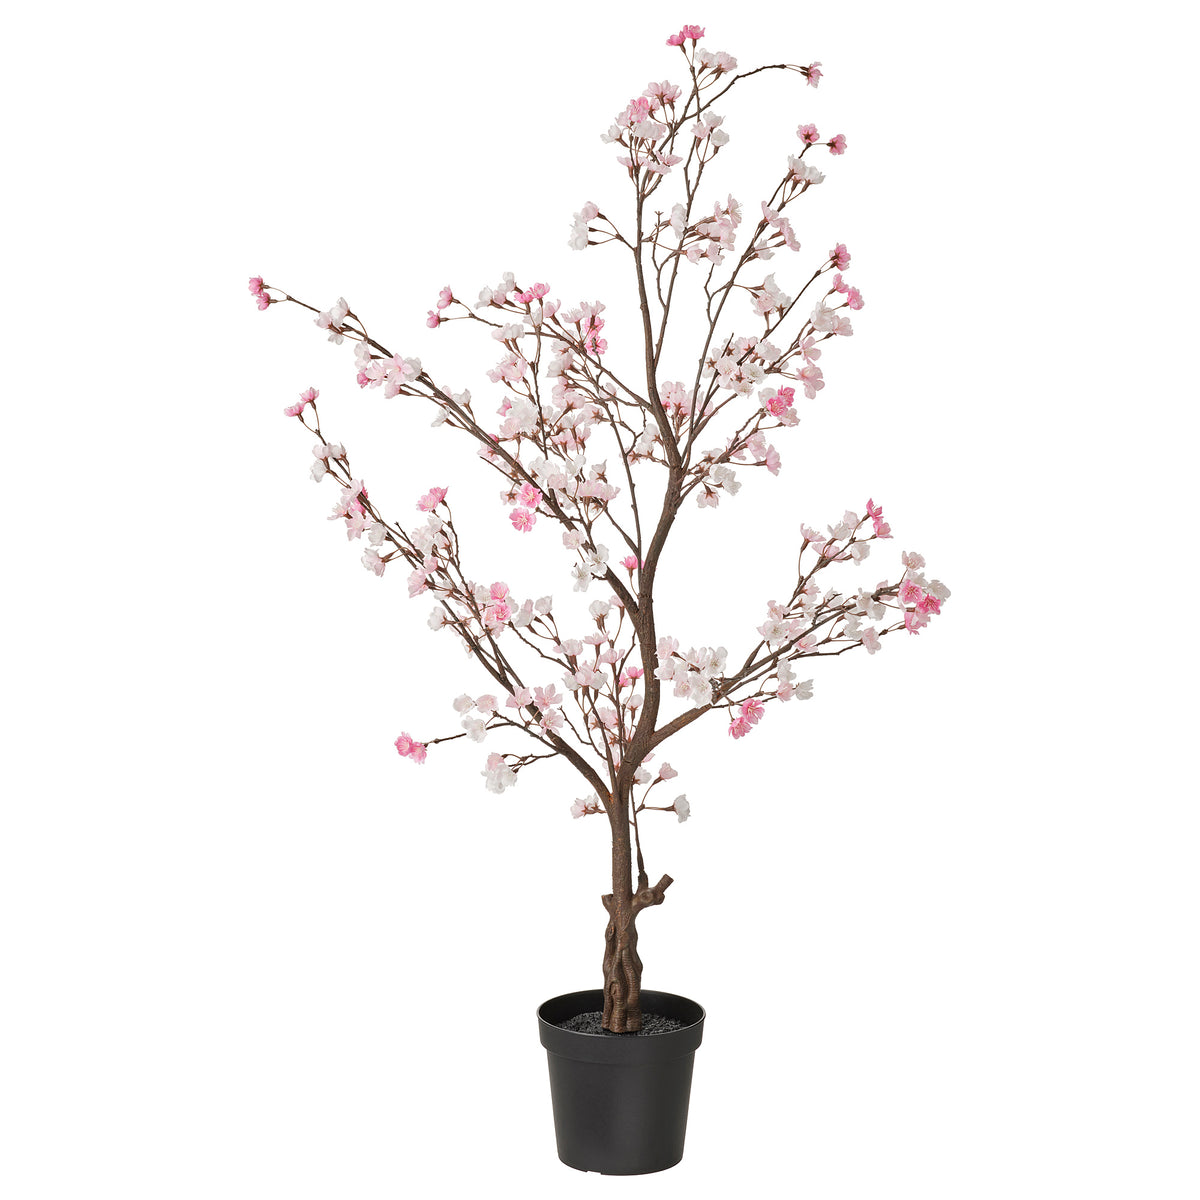 IKEA FEJKA Artificial Potted Plant, In/Outdoor/Cherry-Blossoms Pink, 15 cm